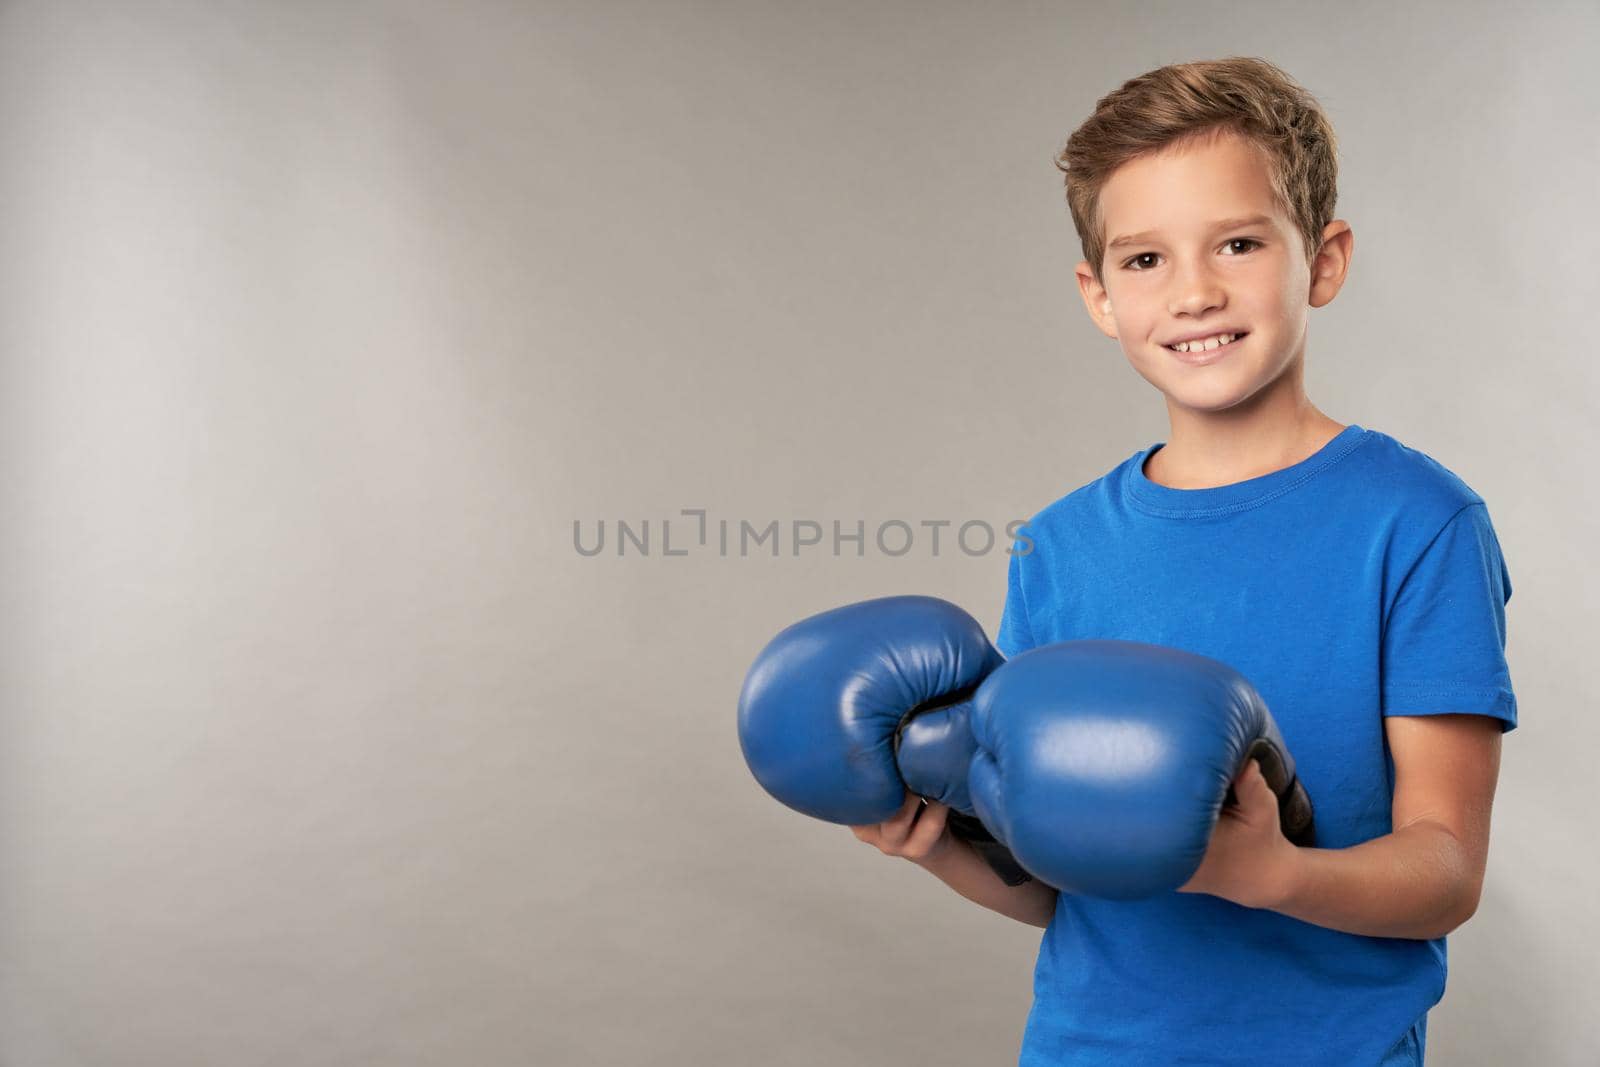 Cheerful male child in blue shirt looking at camera and smiling while holding boxing gloves